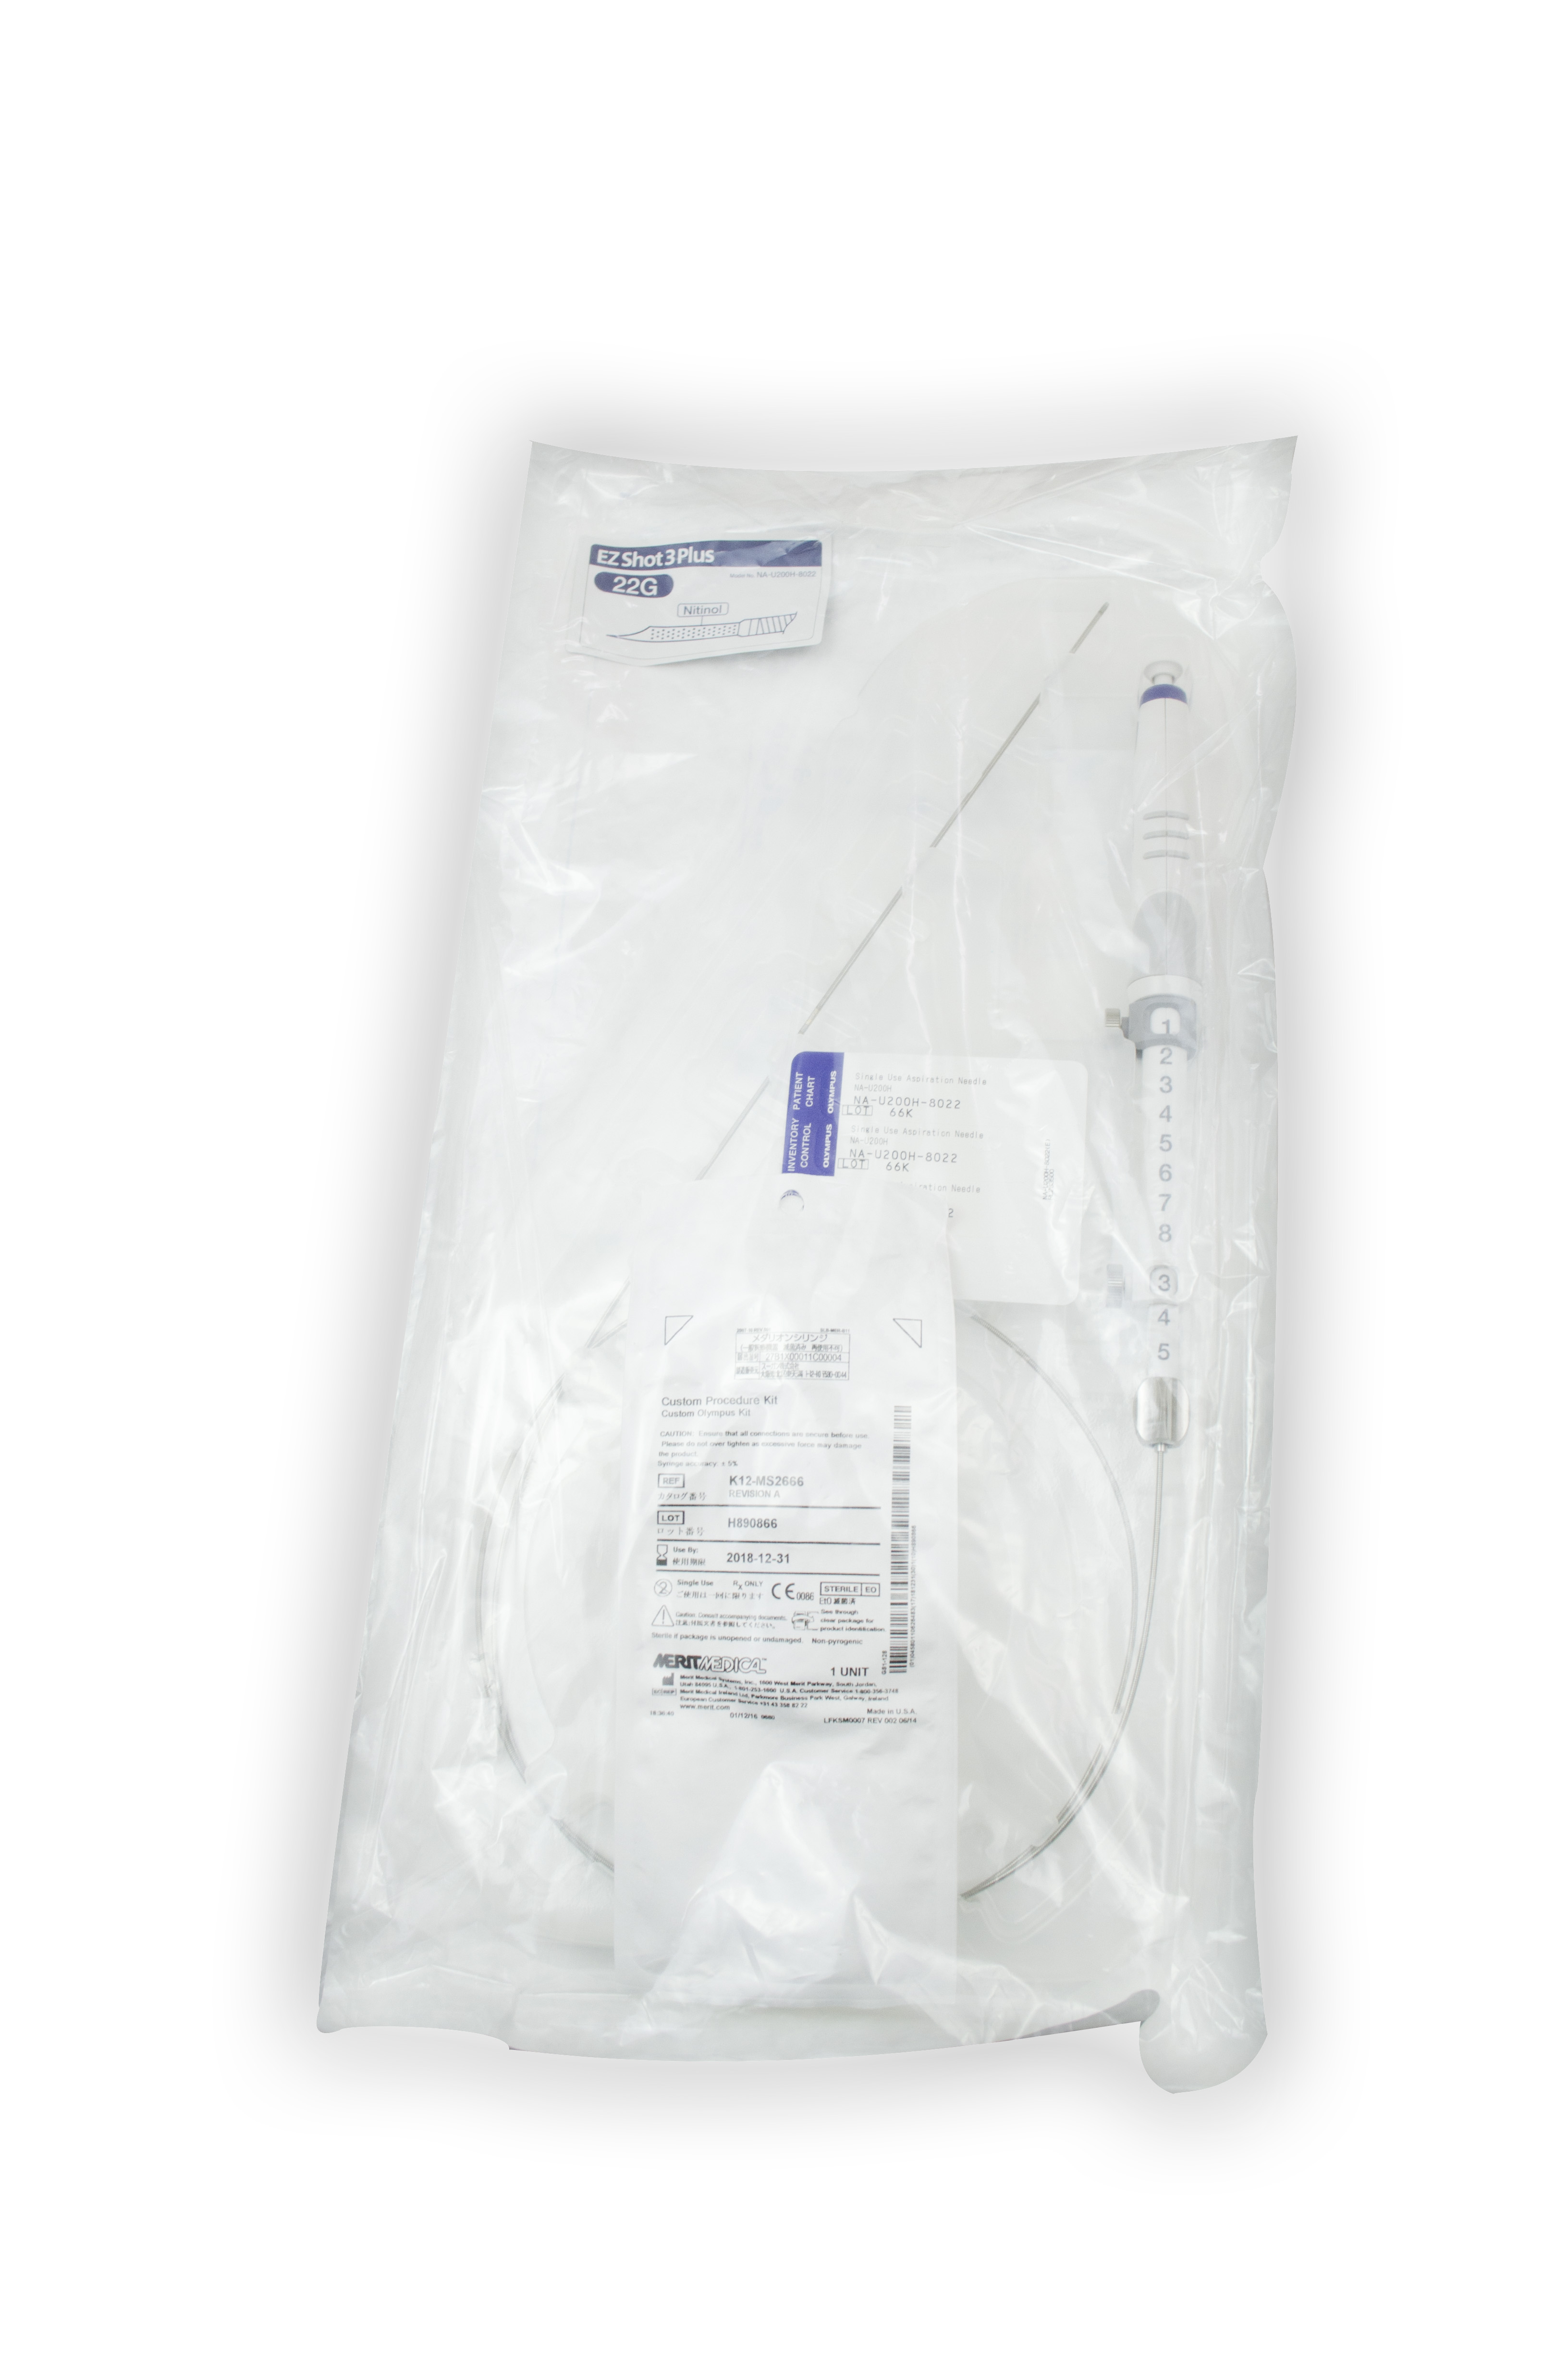 [Out-of-Date] Olympus Disposable Aspiration Needle (2.8 mm x 1400 mm) - NA-U200H-8022 (Original Packaging)